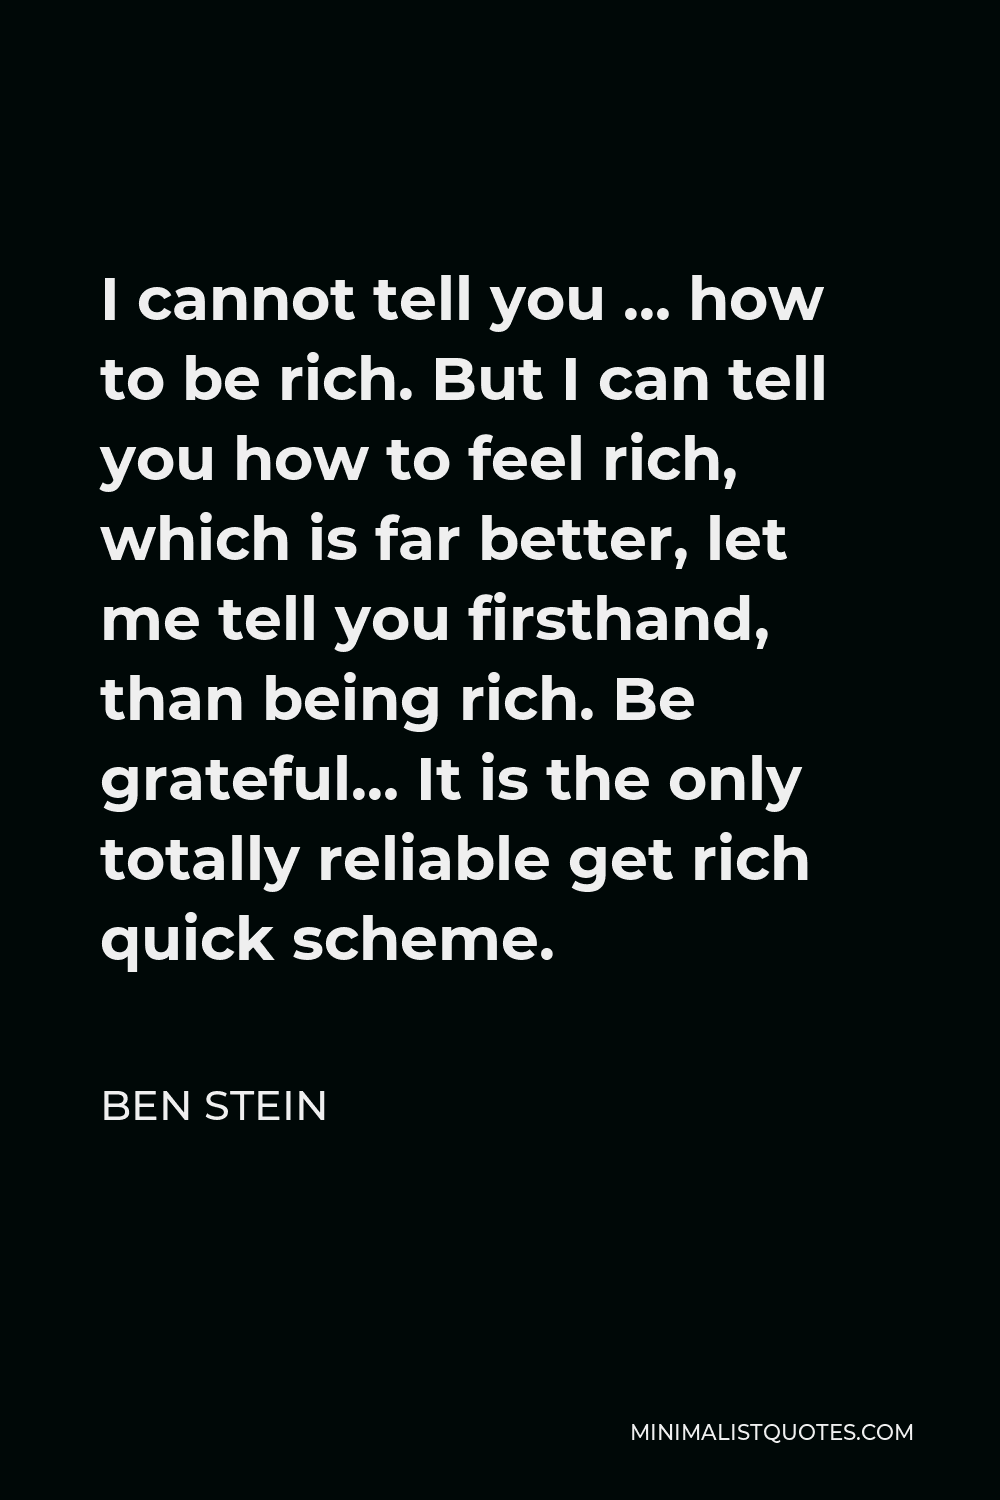 Ben Stein Quote - I cannot tell you … how to be rich. But I can tell you how to feel rich, which is far better, let me tell you firsthand, than being rich. Be grateful… It is the only totally reliable get rich quick scheme.